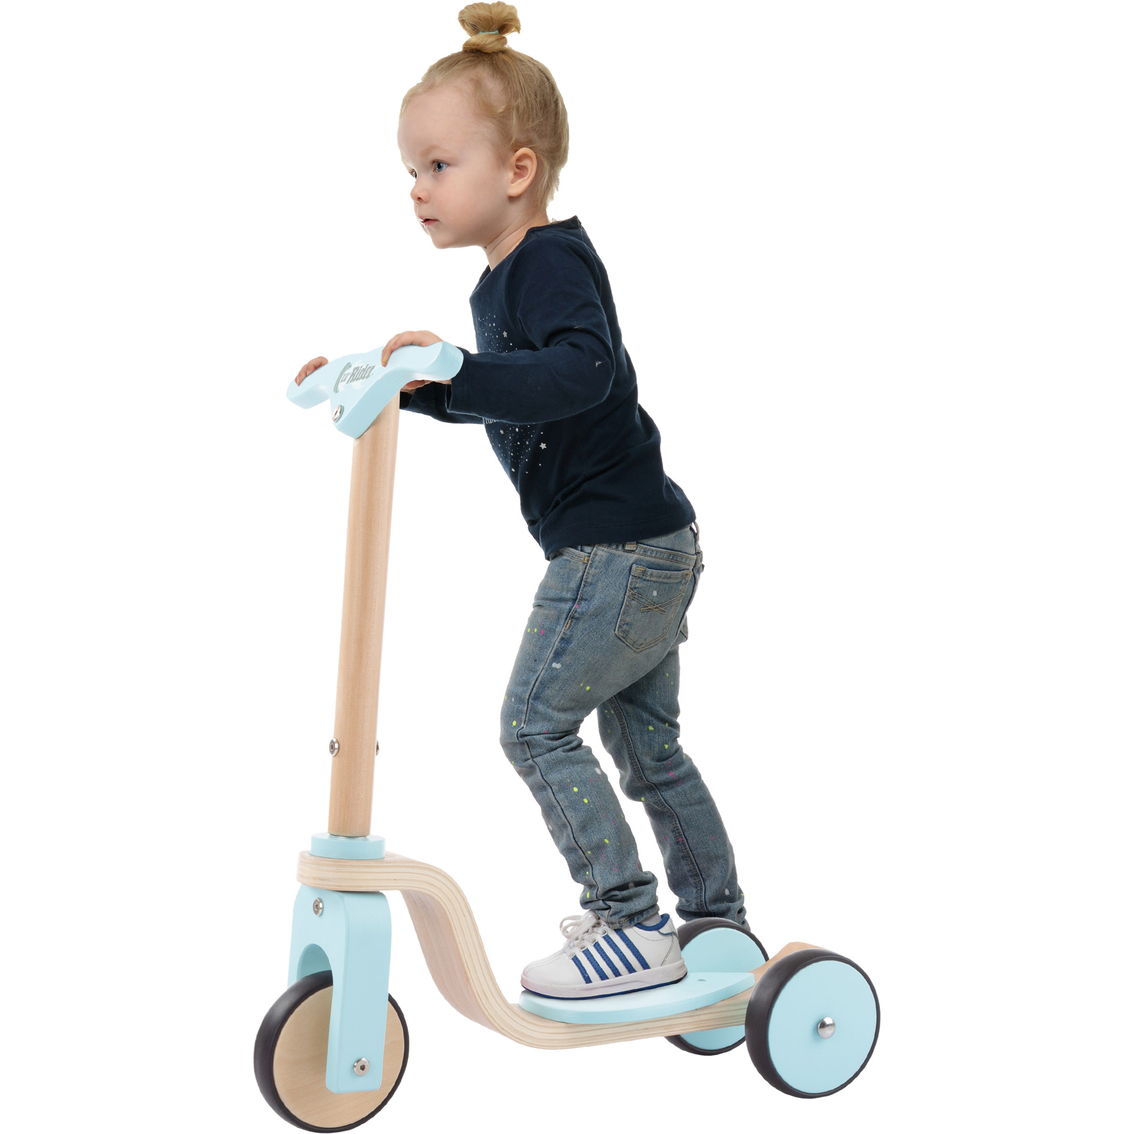 Lil' Rider Wooden Kick Scooter - Image 6 of 6